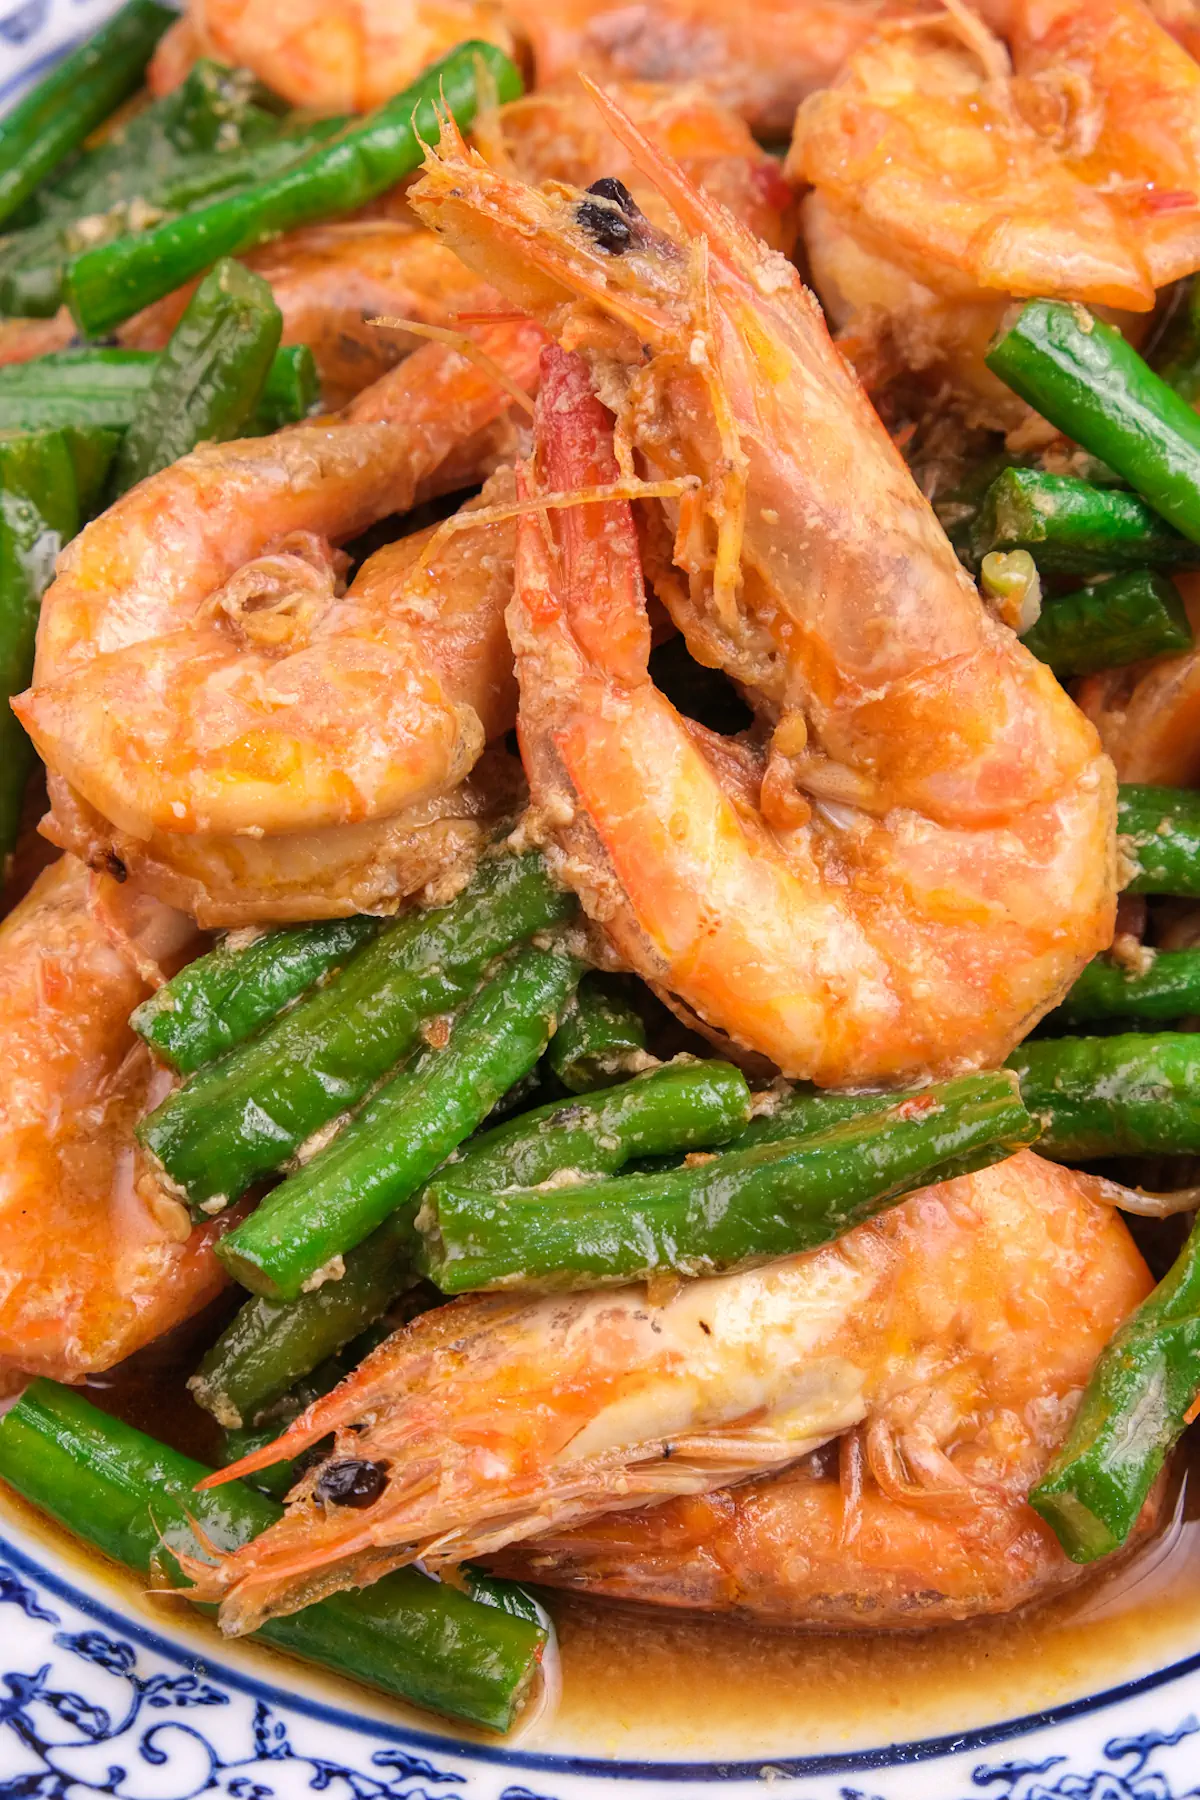 Low-carb shrimp stir fry with string beans in spicy sambal oelek served on a plate.